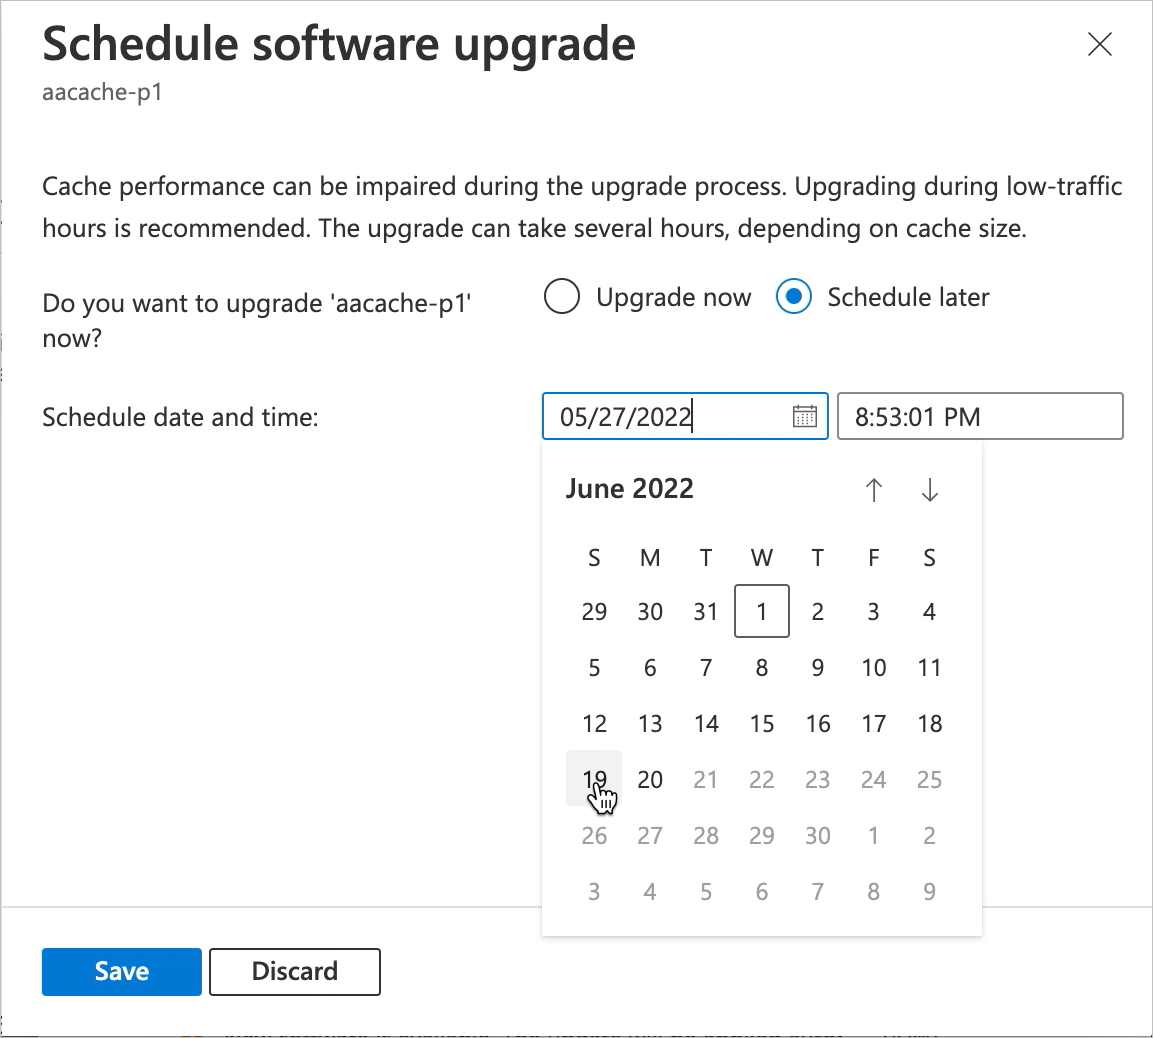 Screenshot of the Schedule software upgrade blade showing radio buttons with 